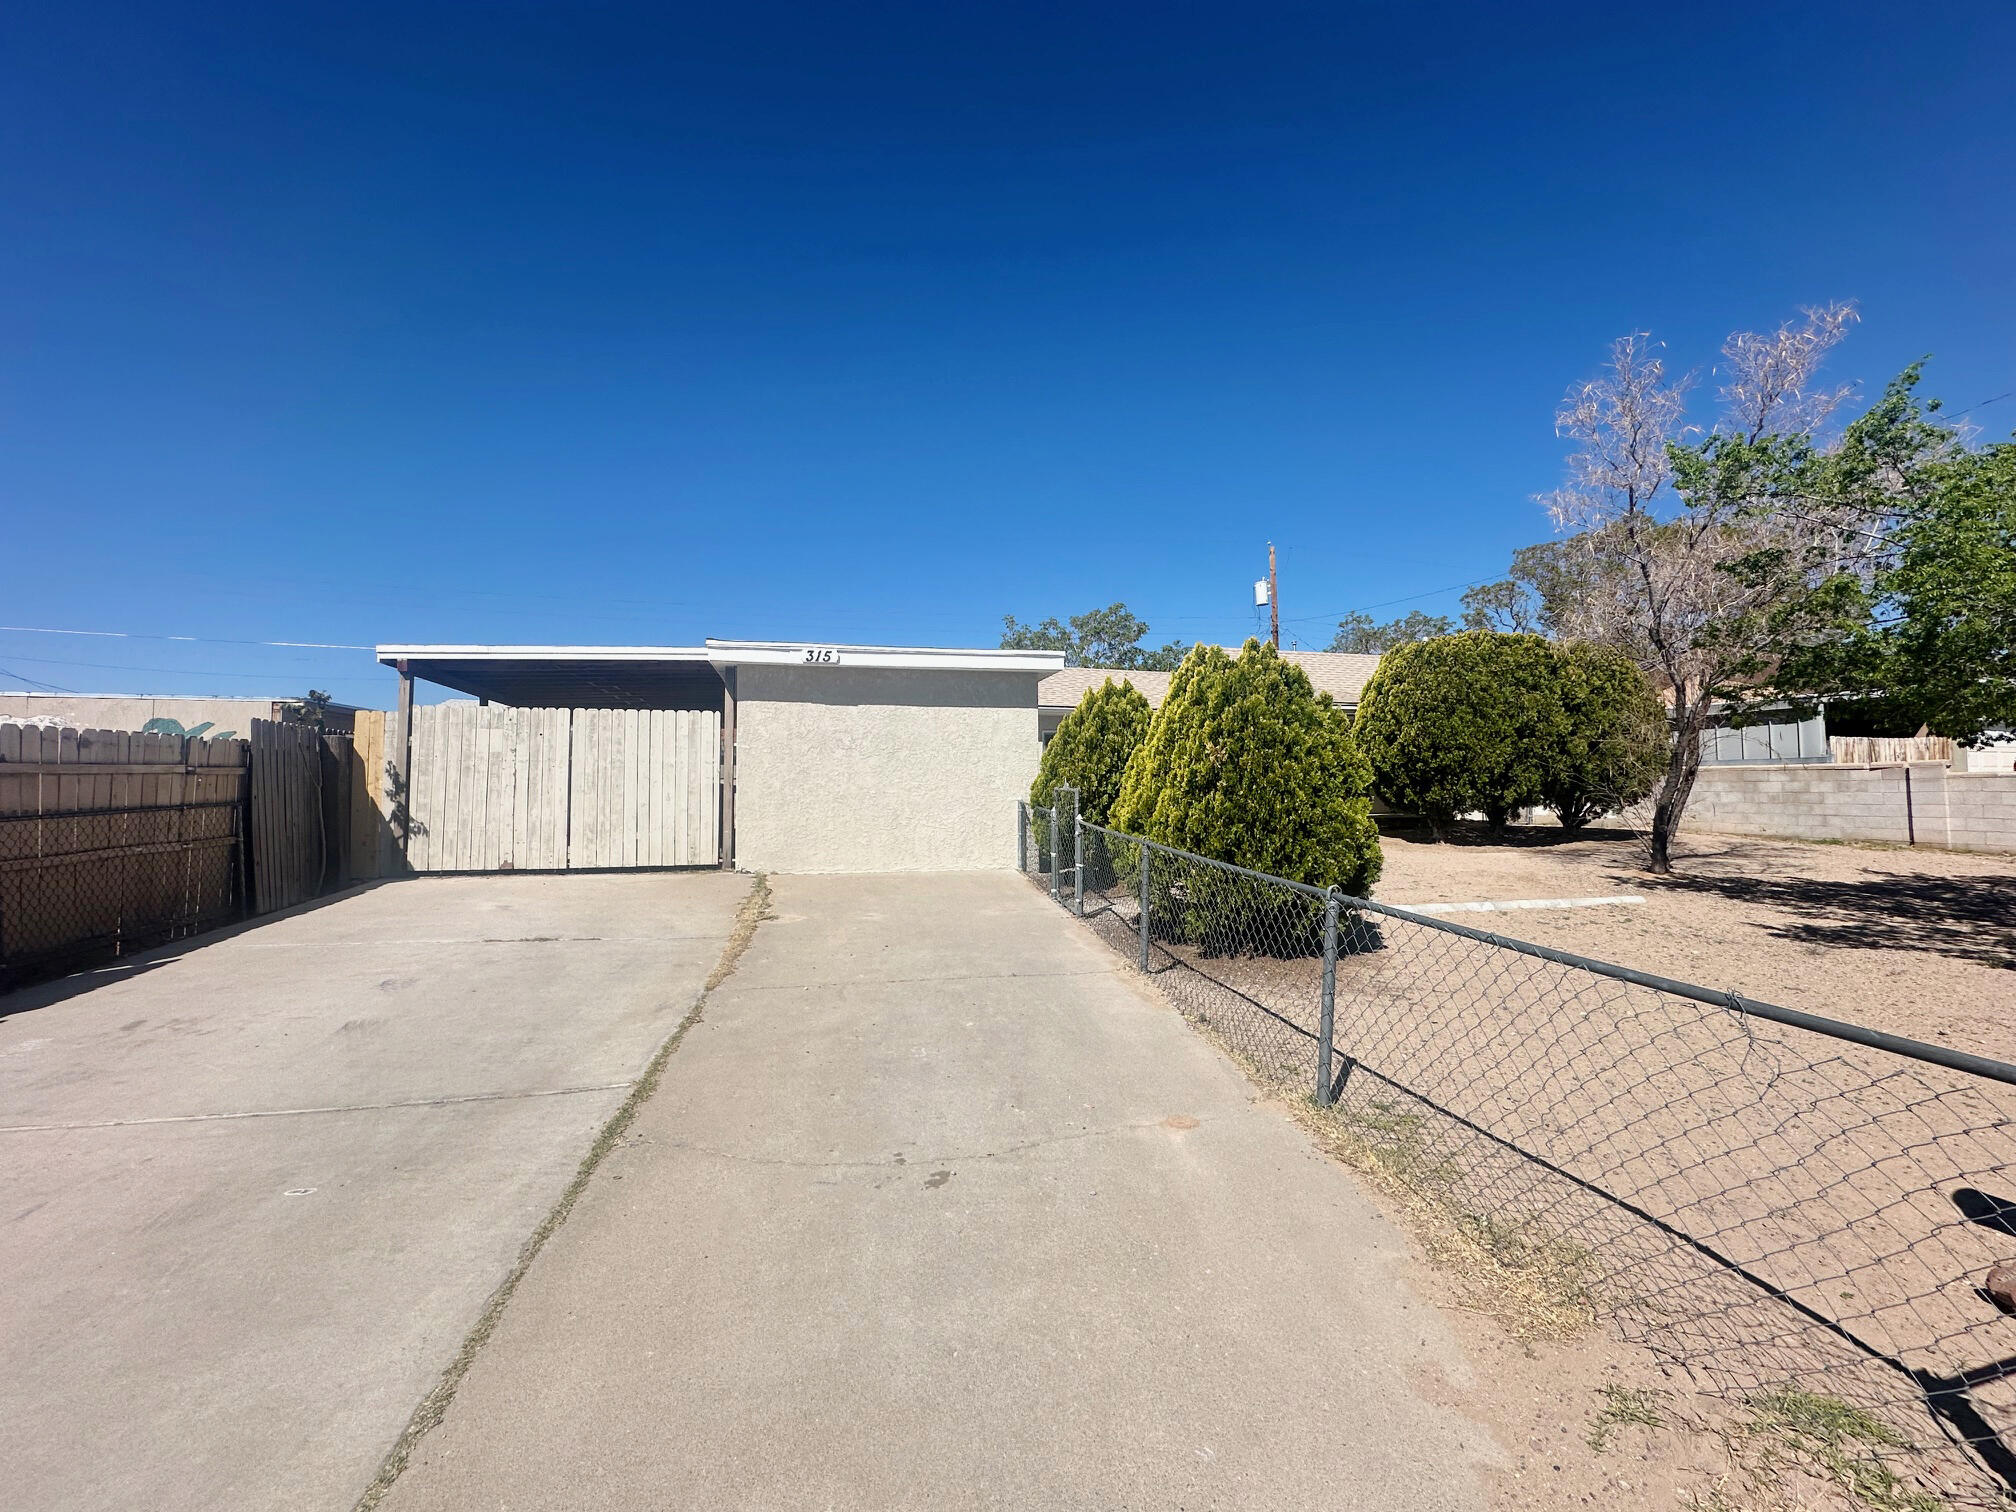 This 2 bedroom, 1 bathroom home is located close to infrastructure such as dining and shopping and convenient access to I-40 and downtown Albuquerque. Newer flooring and paint. Refrigerated air conditioning to stay cool as the temps get higher. Plenty of parking in the driveway and under the carport.